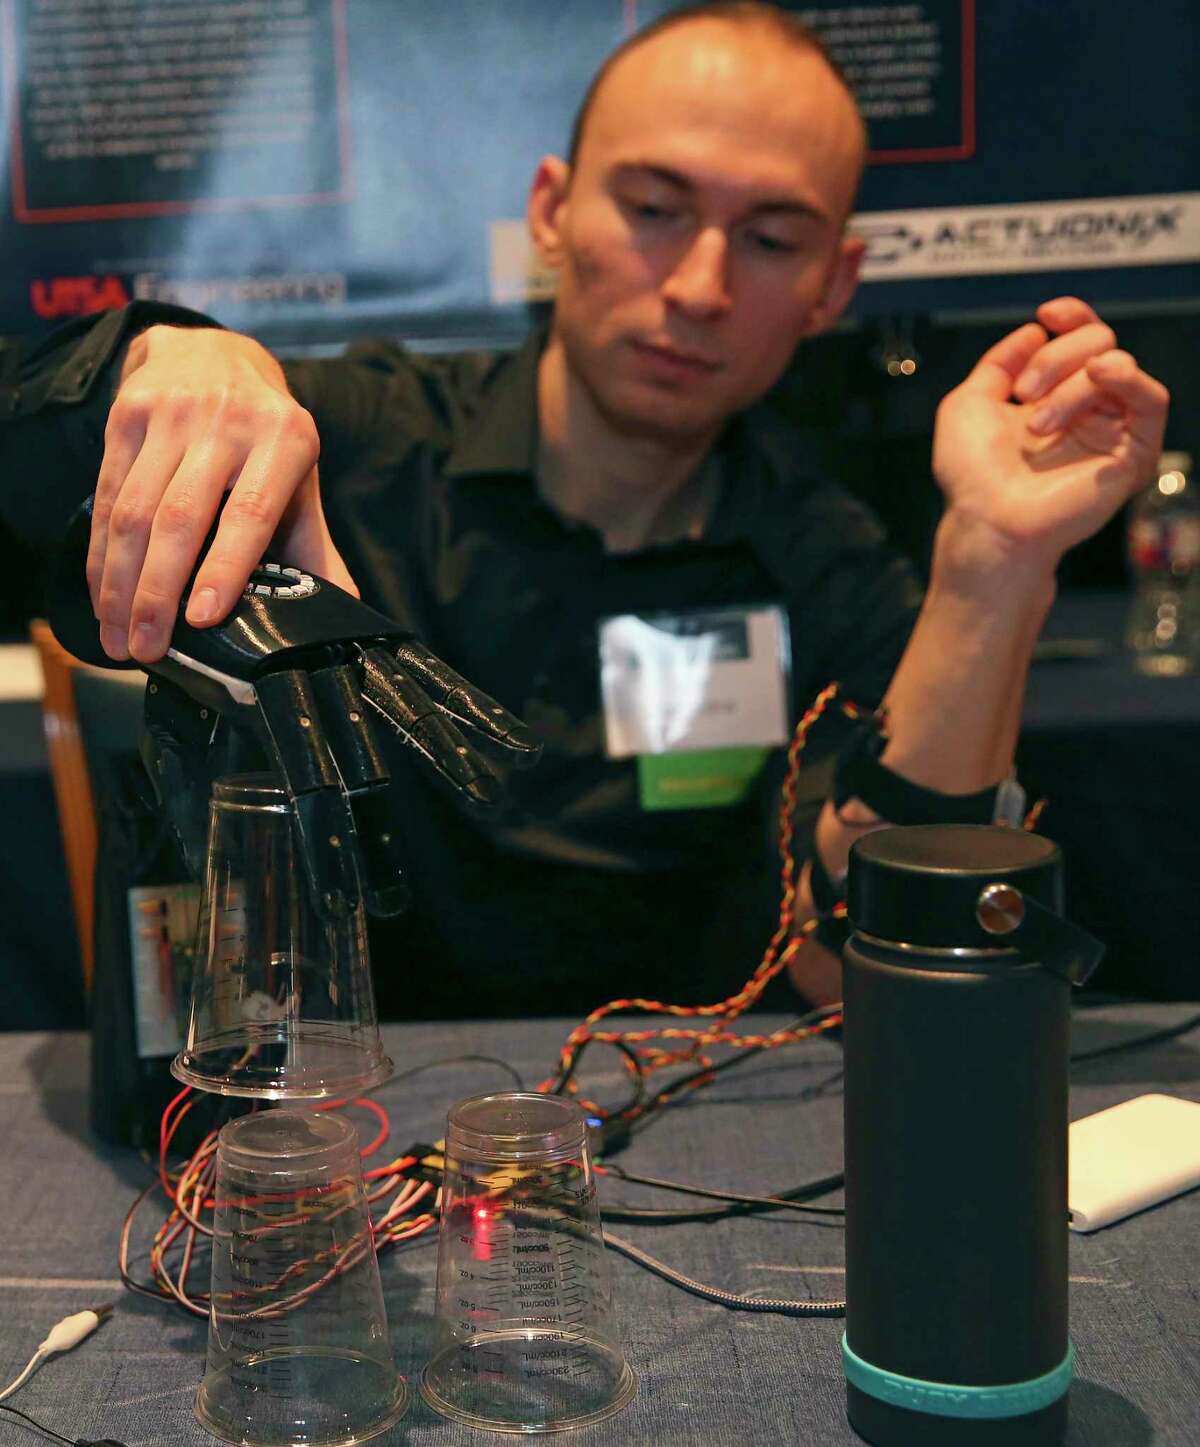 Ryan Saavedra, 26 of San Antonio, demonstrates the Globally Available Robotic Arm at the University of Texas at San Antonio Fall 2019 Tech Symposium on Tuesday. Saavedra and fellow senior engineering students Ruairidh McWilliam, Evan Jenkins, and Max Brecheisen designed and built the low-cost bionic hand for below-elbow amputees.